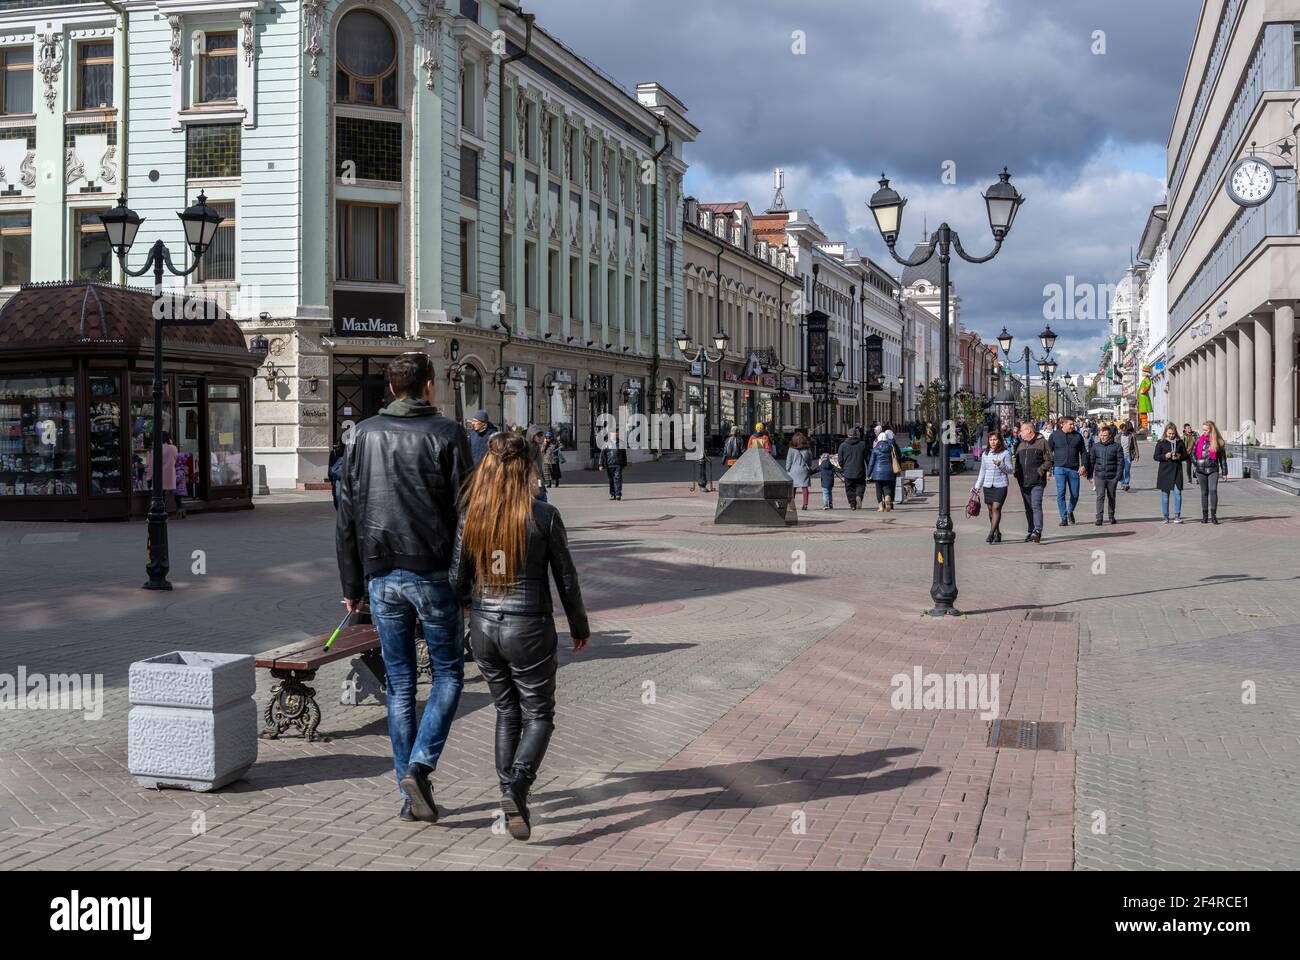 Kazan, Russia - September 21, 2019: The shopping center in the city of Kazan with strawling people and shops, Russia. Stock Photo